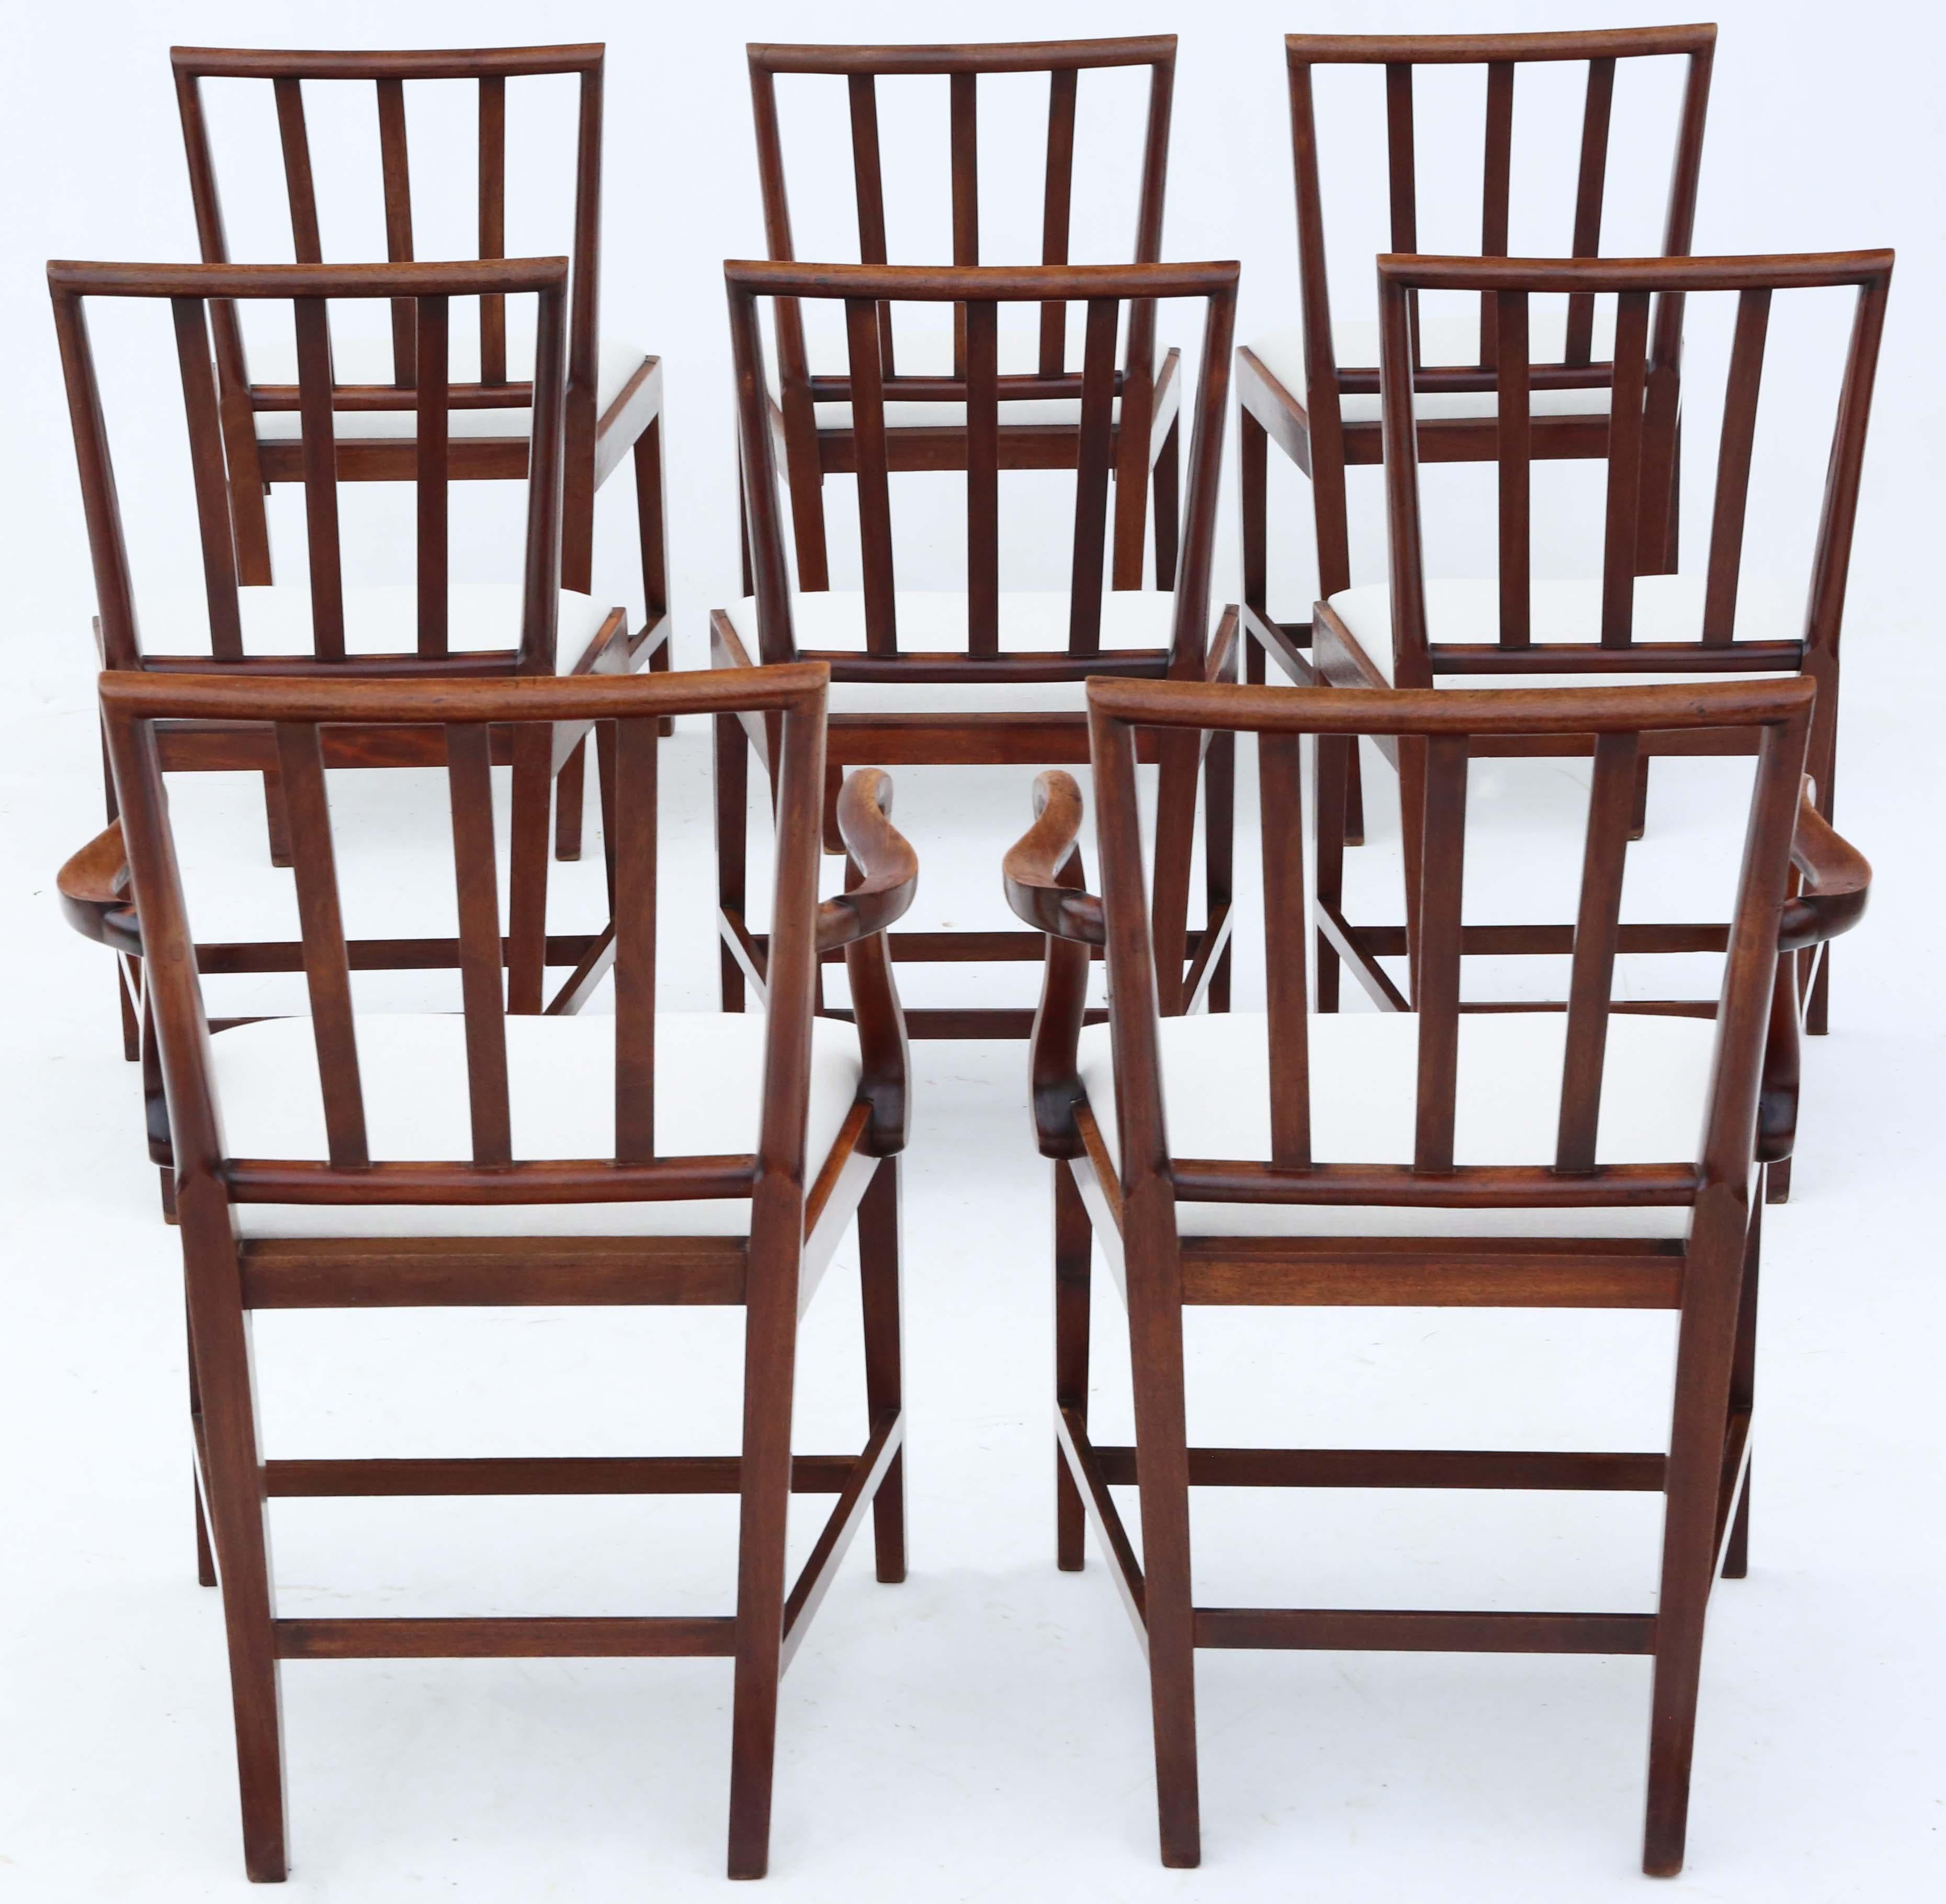 Regency Mahogany Dining Chairs: Set of 8 (6+2), Antique Quality, Early 19th C In Good Condition In Wisbech, Cambridgeshire